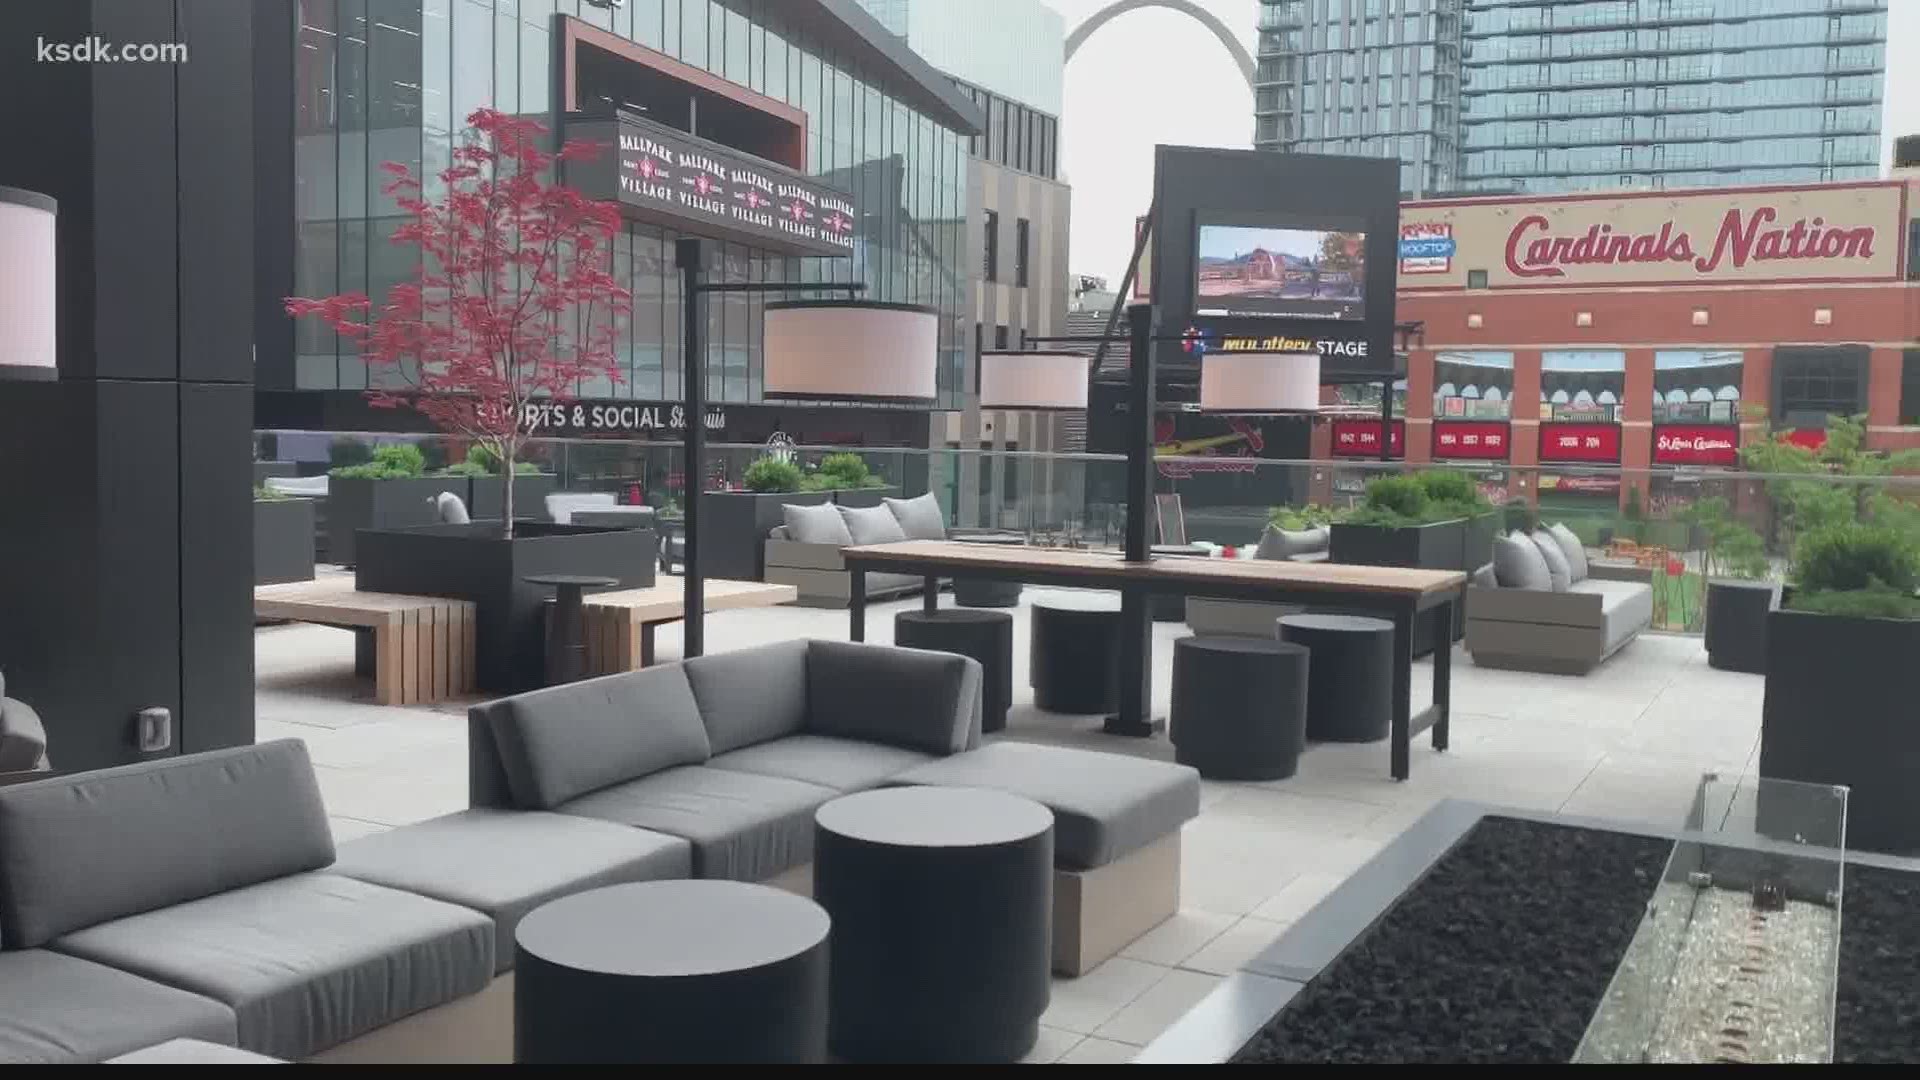 Experience comfortable seating areas, dining tables, an over-sized fire pit, a 12-foot outdoor viewing screen and incredible views of Busch Stadium.